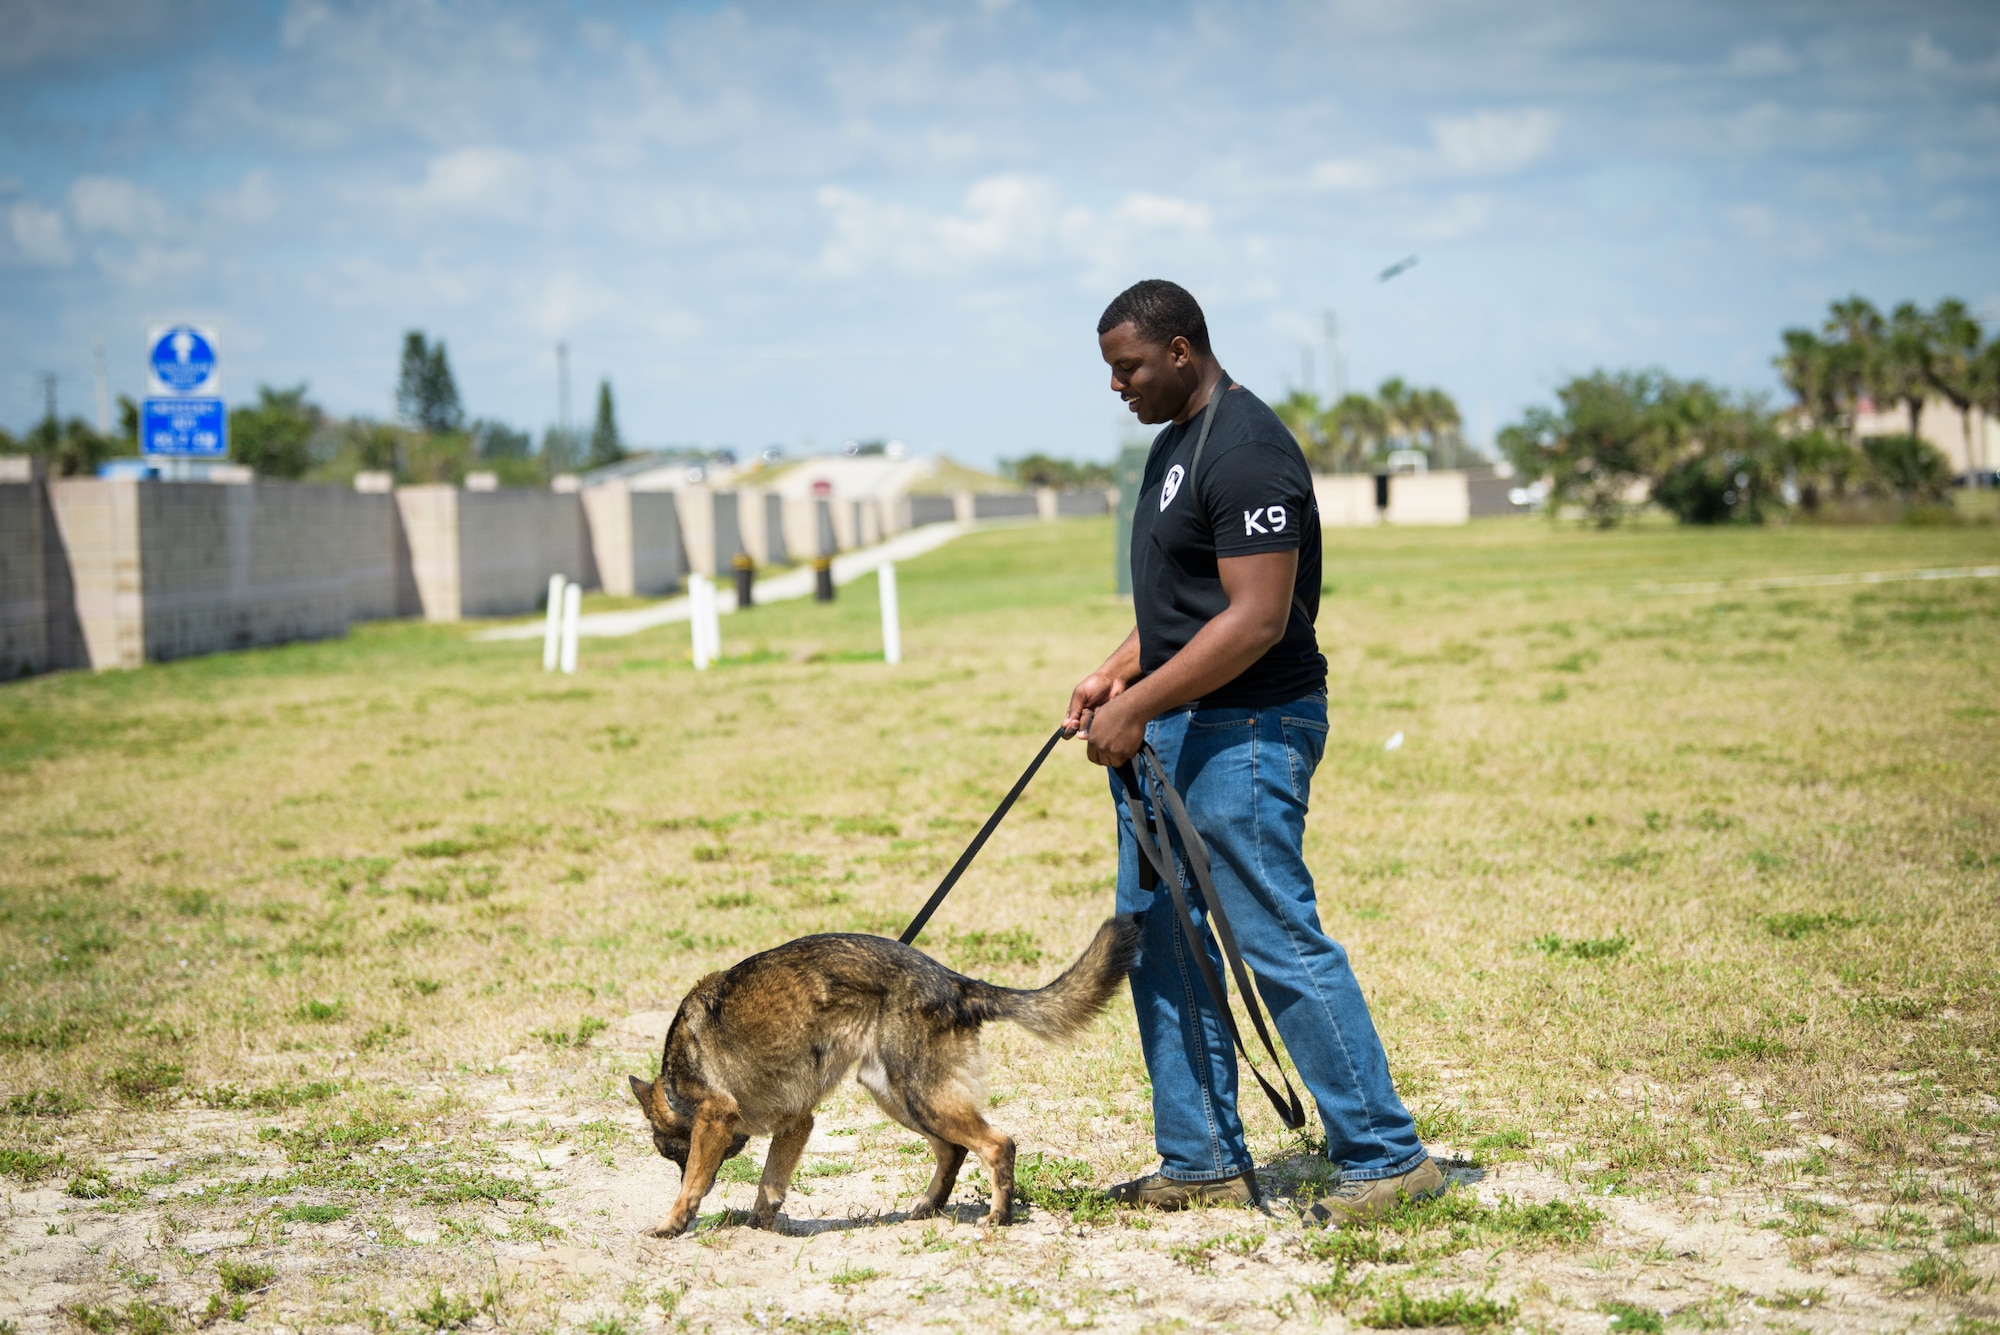 Senior Airman Antoine Carr, future military working dog handler, watches as MWD Dome does a sweep for explosive materials April 26, 2018 at Patrick Air Force Base, Fla. Carr, until his own MWD returns froma deployment, trains with other handler's dogs – but says he can't wait for the day that he can go on patrols, do sweeps and just enjoy the company of his own dog. (U.S. Air Force phot by Airman 1st Class Zoe Thacker)